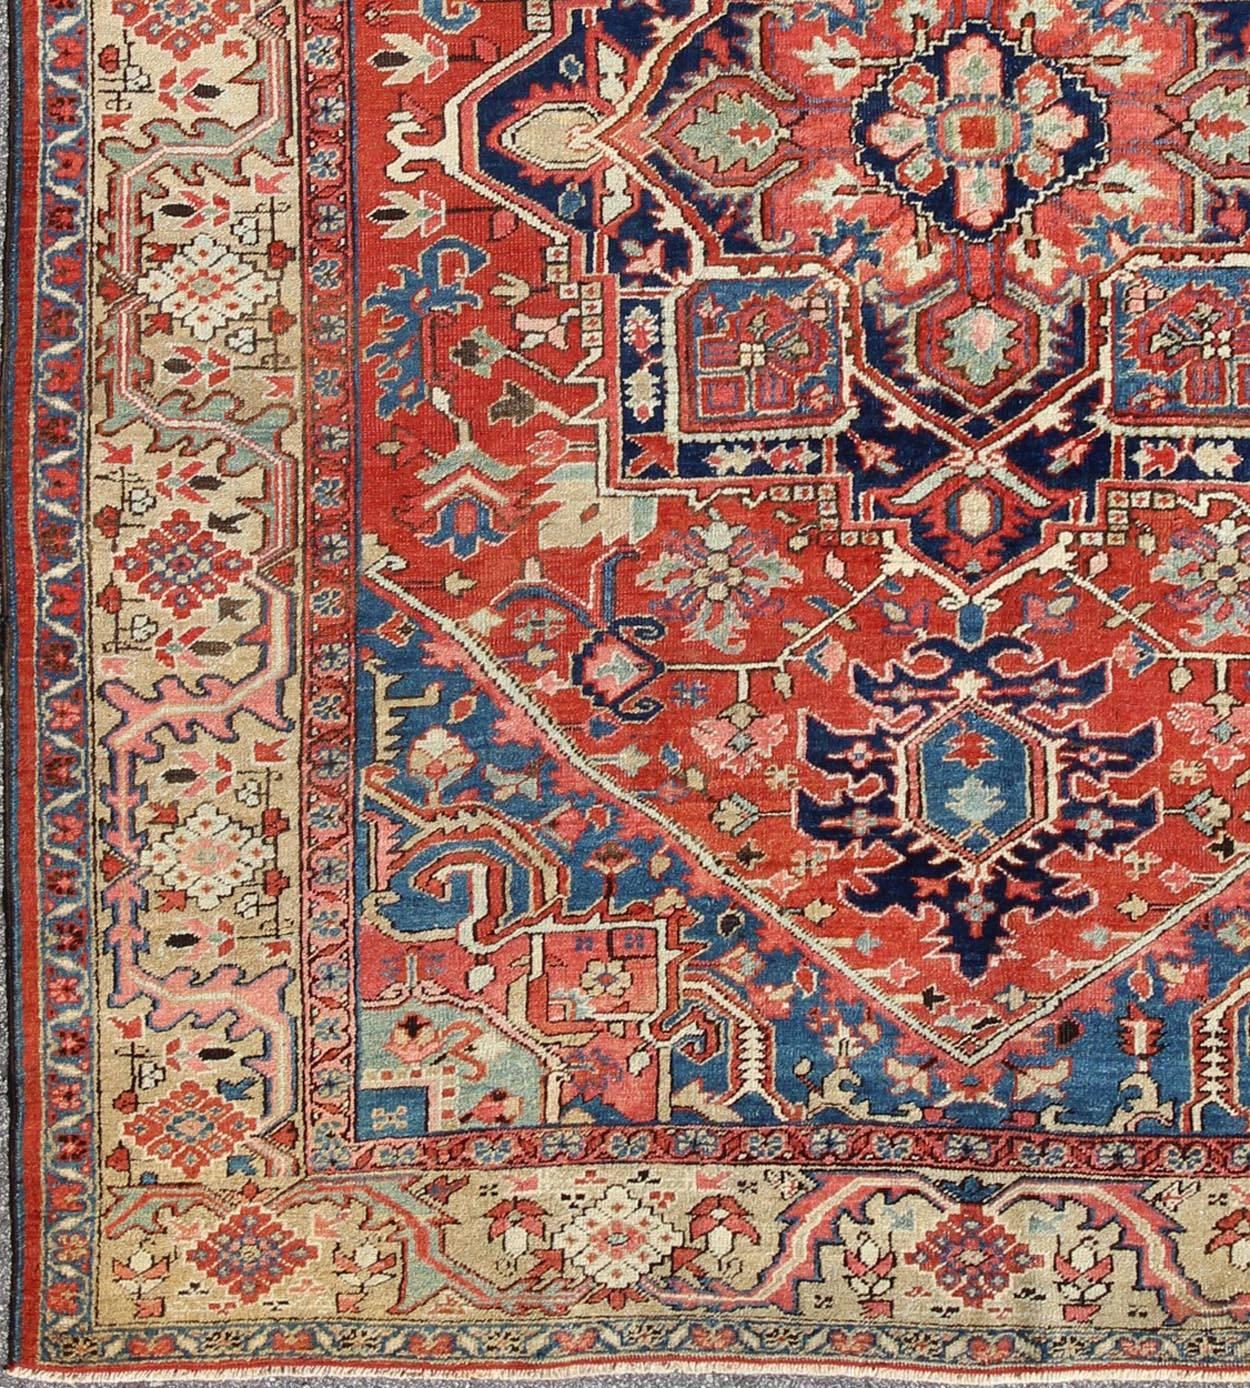 Antique Persian Serapi Rug with Geometric Central Medallion and Colorful Design. Keivan Woven Arts / Rug / 16-0305, country of origin / type: Iran /Heriz, circa 1910
Measures: 10' x 12'.
This magnificent antique Persian Serapi carpet from the early